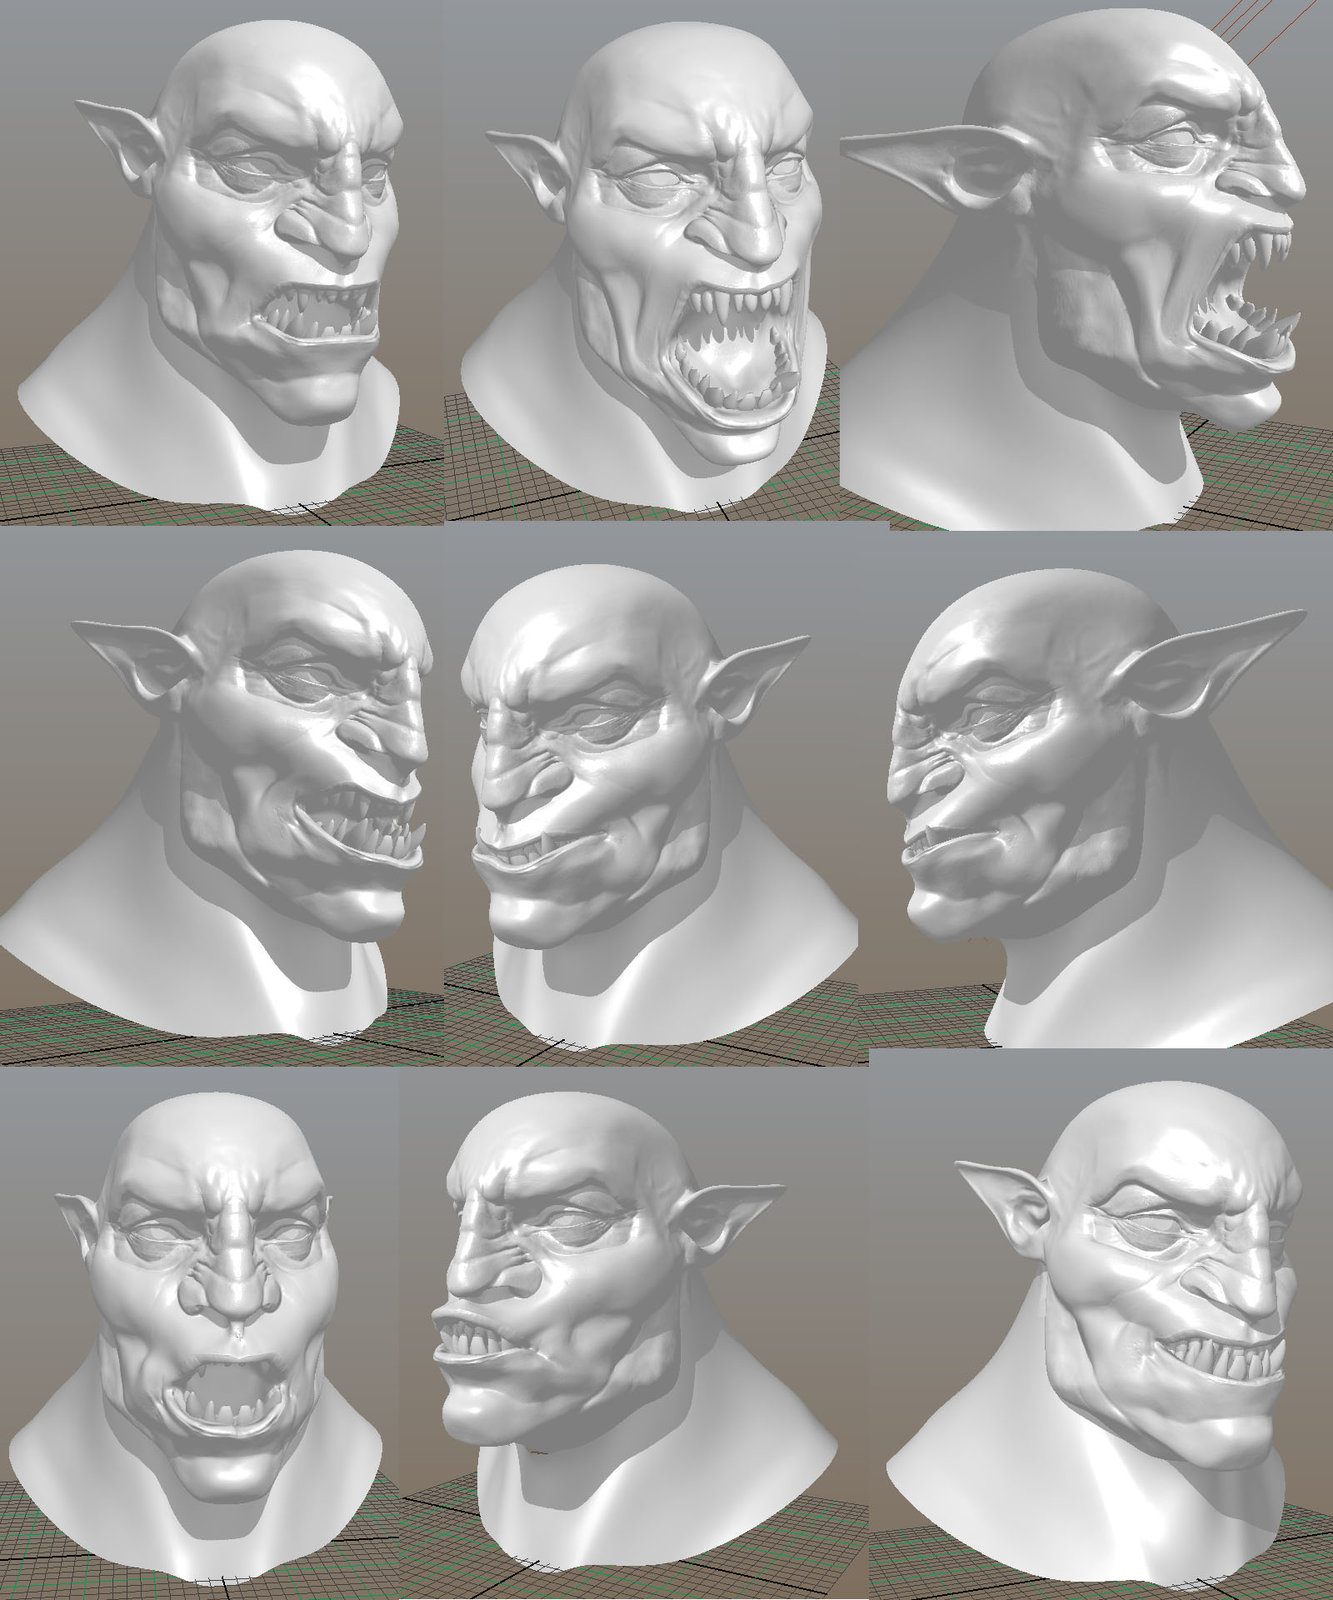 Early tests building a joint-based face rig (no blendshapes used)